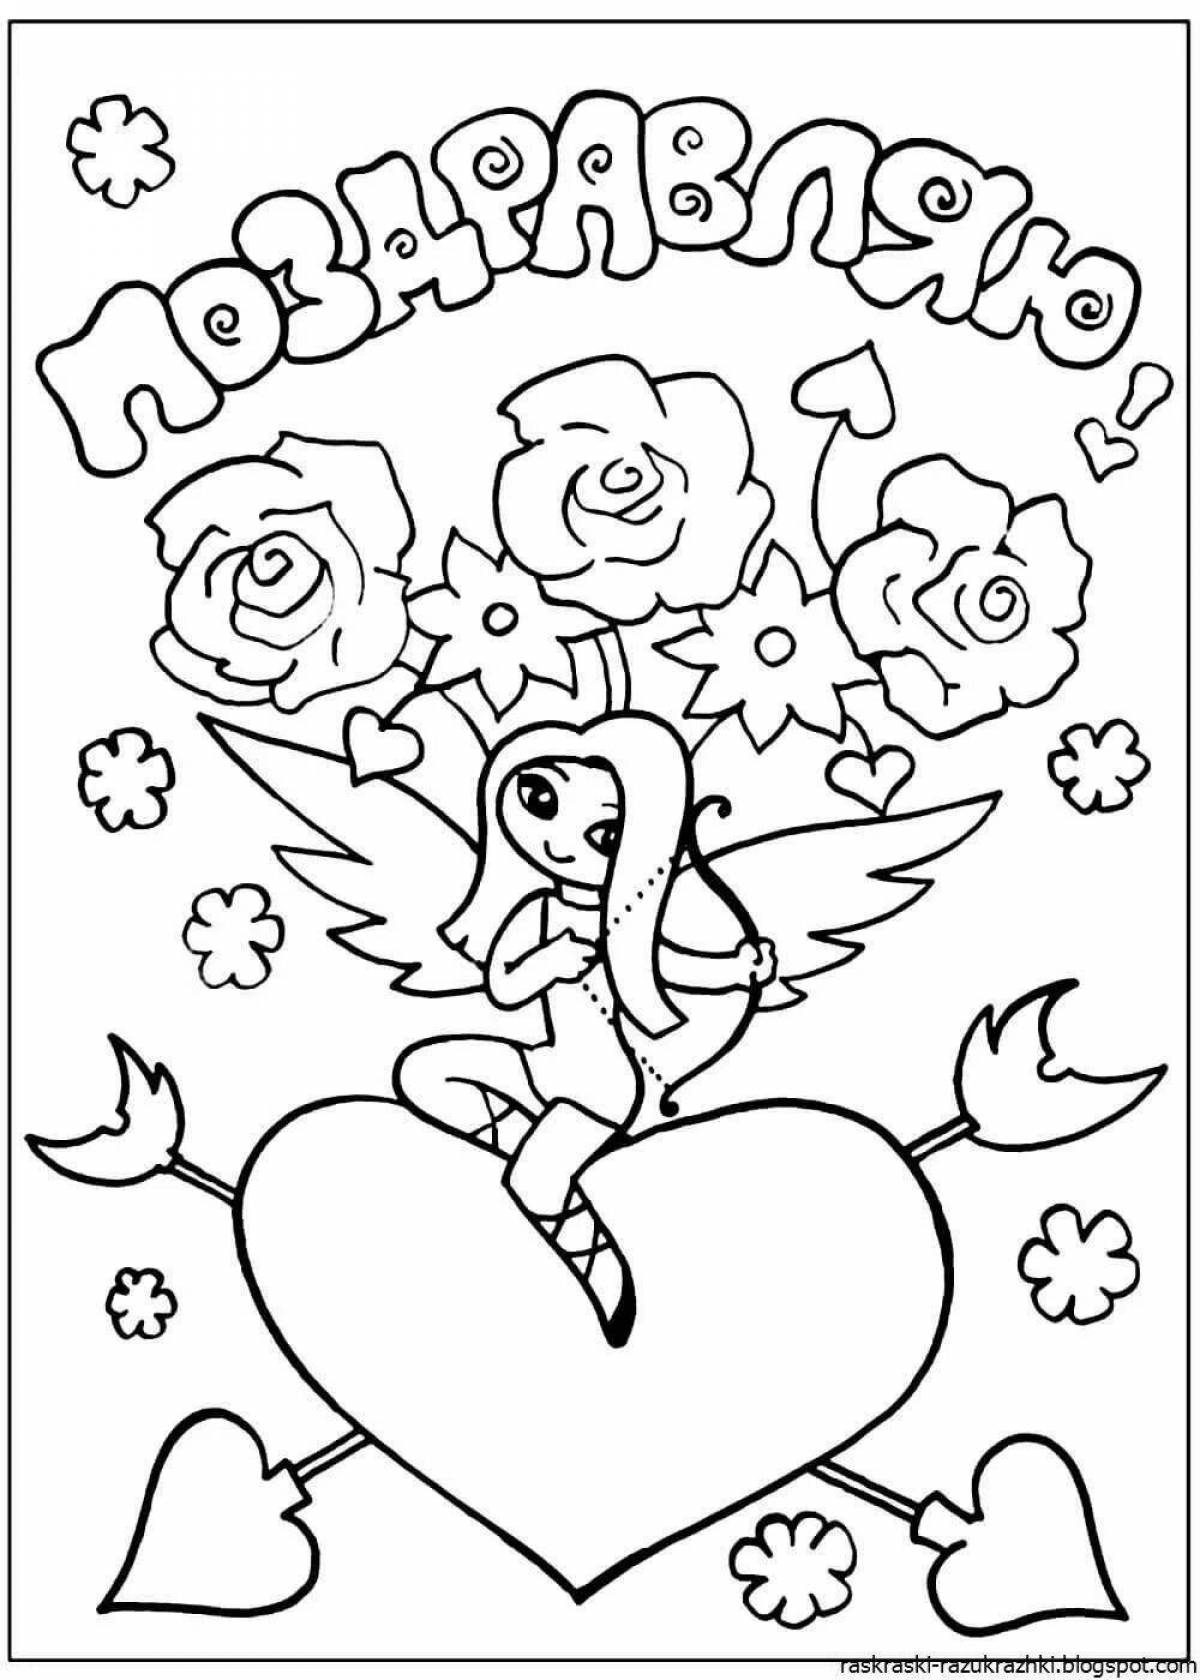 Fun coloring card for teenagers